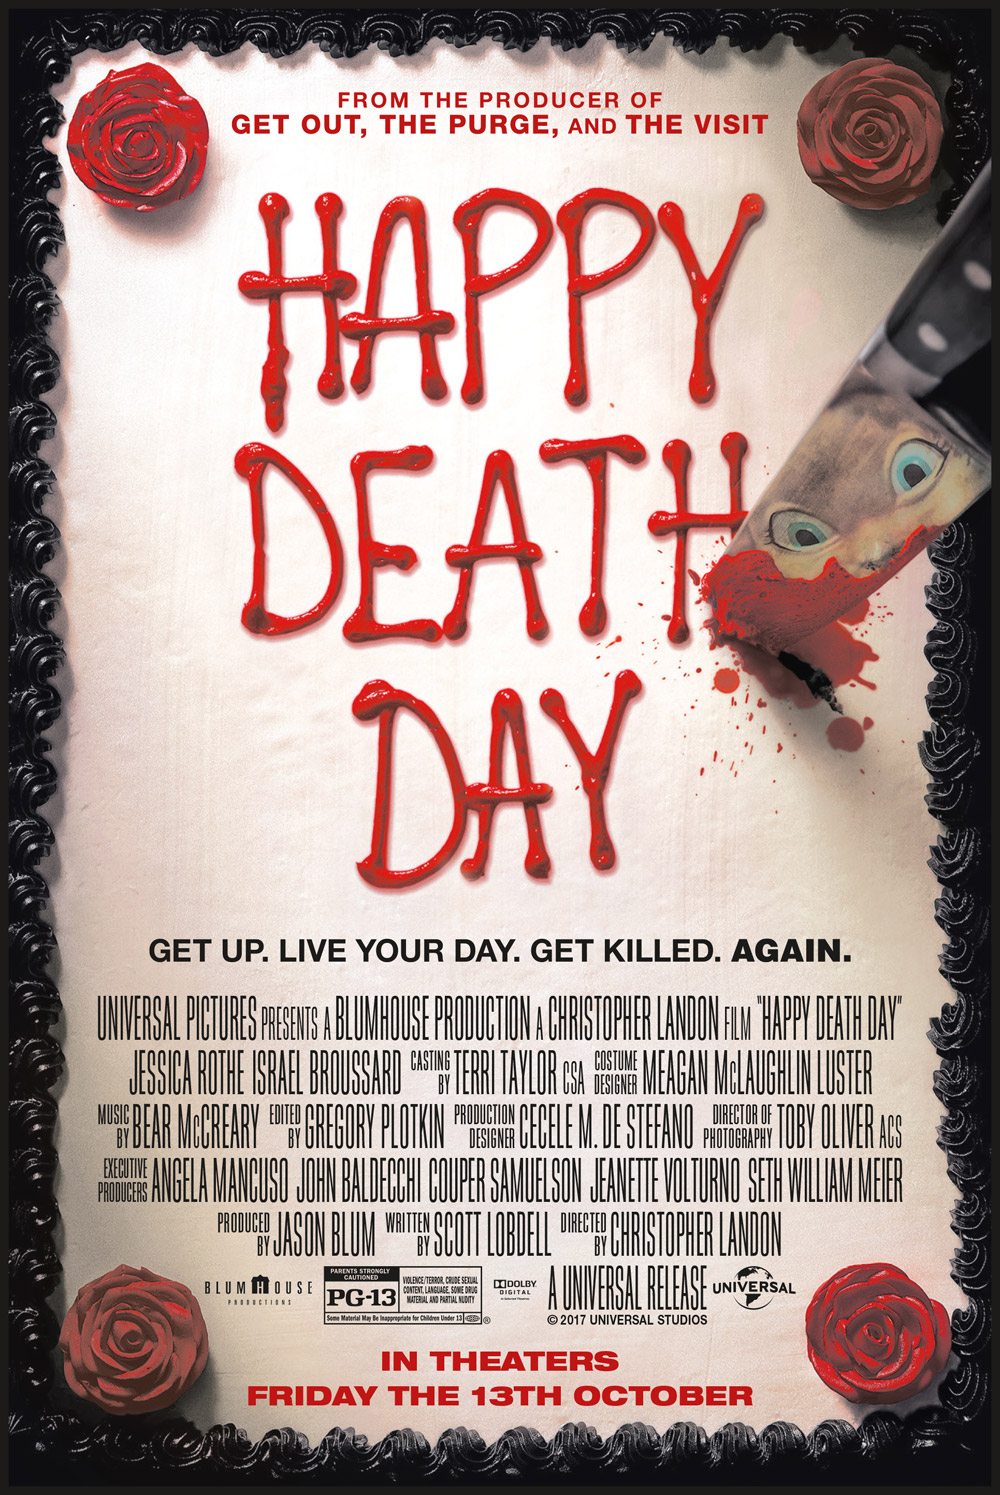 A Review Too Far - Happy Death Day